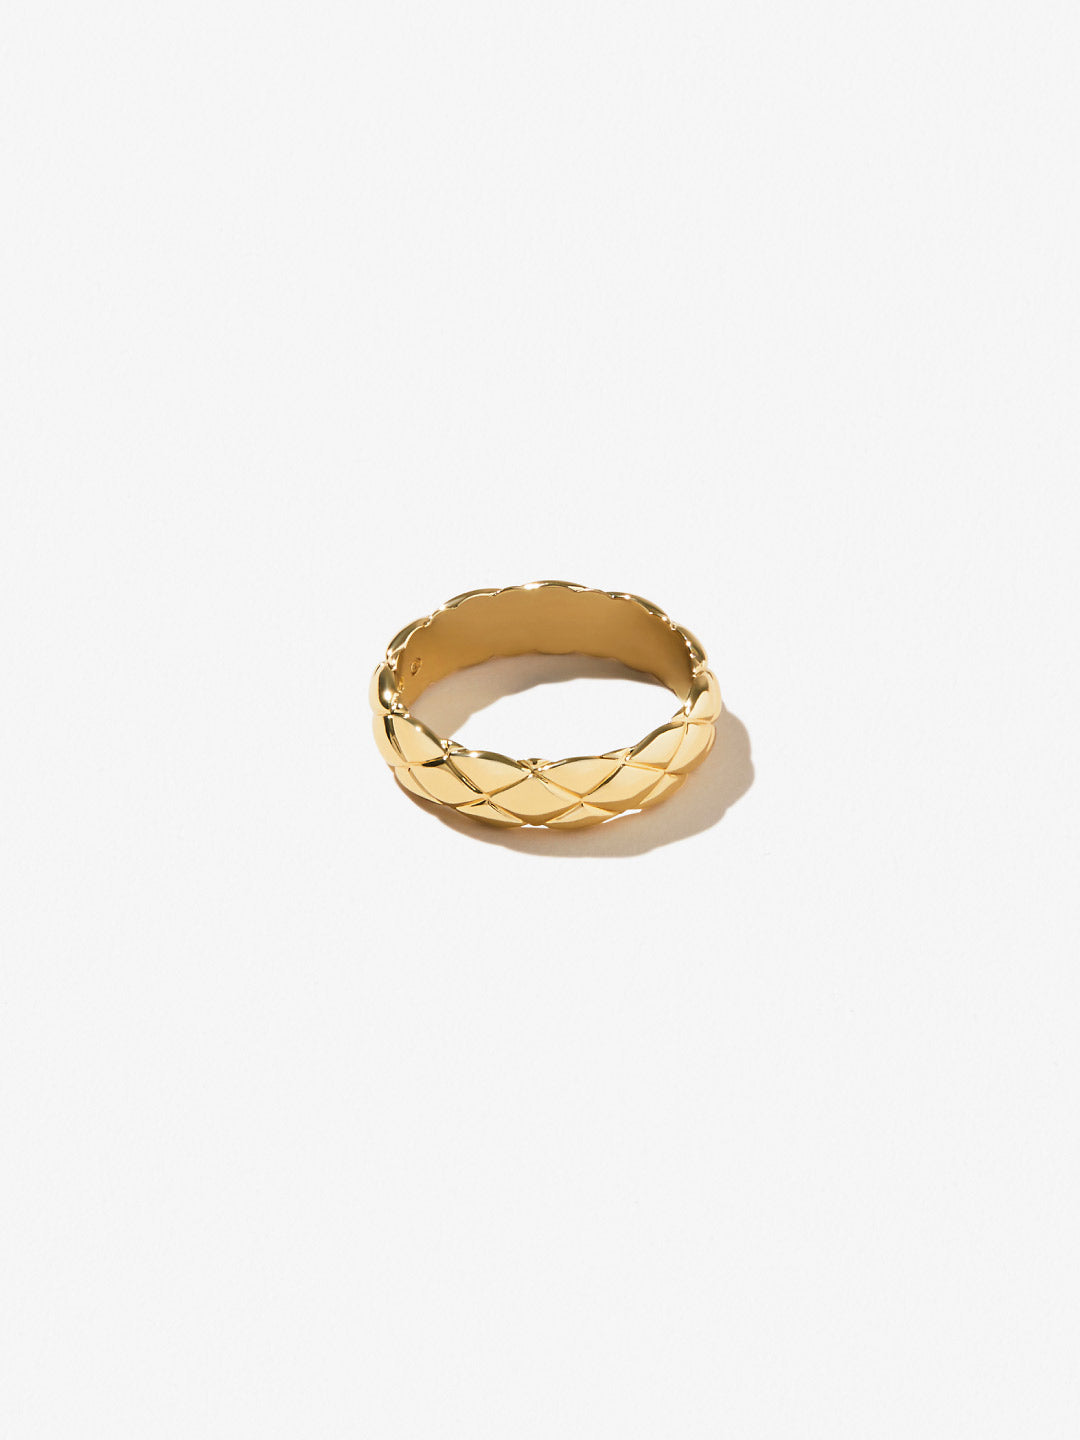 Ana Luisa Jewelry Rings Medium Bands Quilted Ring Zeta Gold